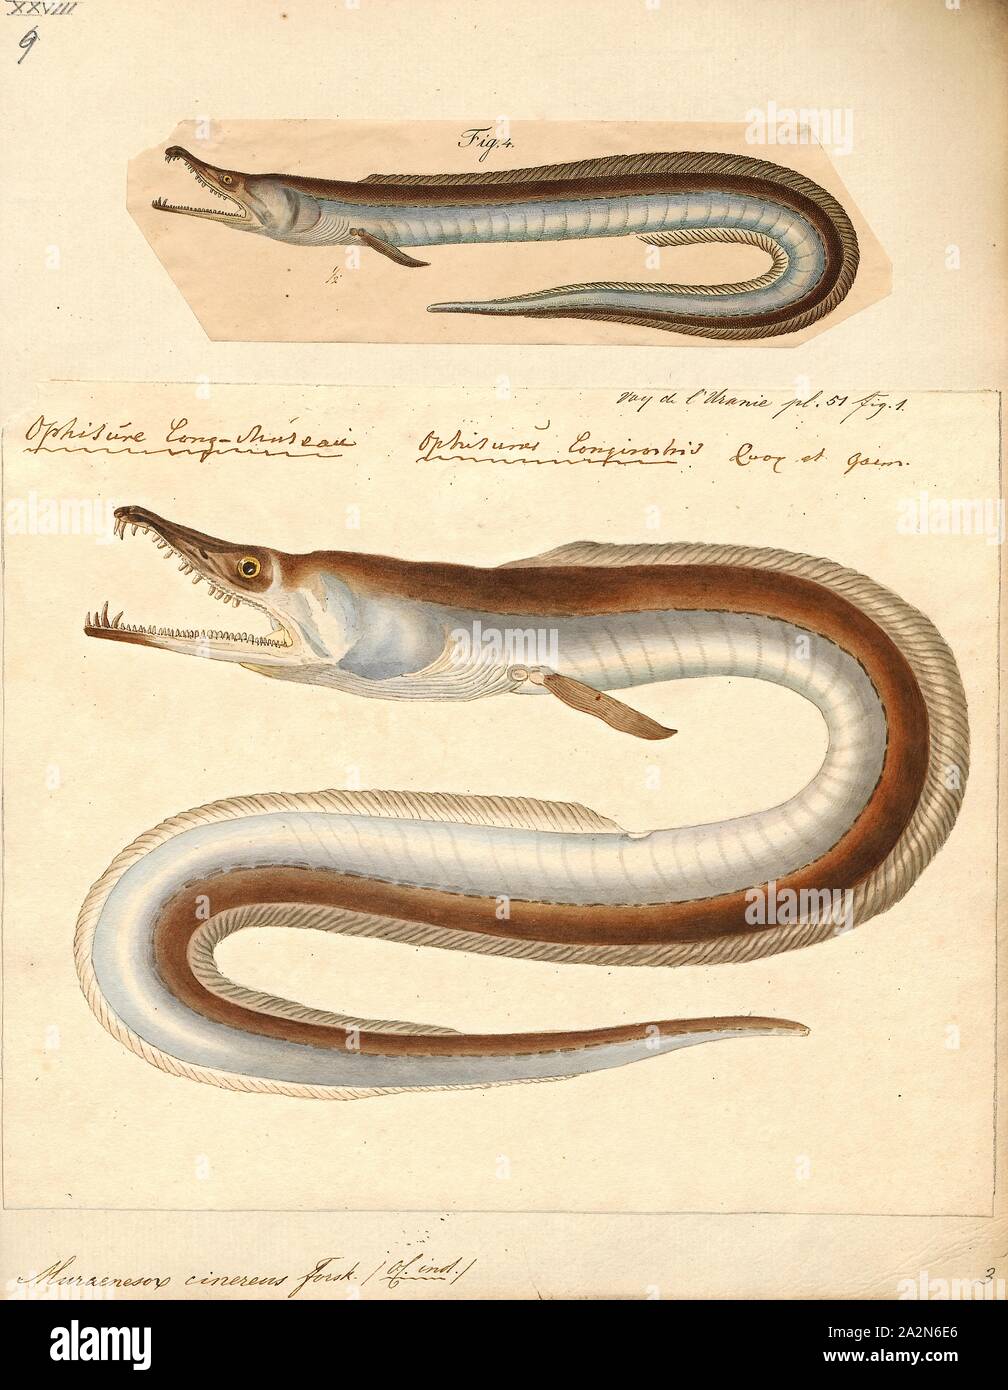 Muraenesox cinereus, Print, The dagger-tooth pike conger (Muraenesox cinereus) is a species of eel. They primarily live on soft bottoms in marine and brackish waters down to a depth of 800 m (2, 600 ft), but may enter freshwater. They are common to about 1.5 m (4.9 ft) in length, but may grow as long as 2.2 m (7.2 ft). Dagger-tooth pike congers occur in the Red Sea, on the coast of the northern Indian Ocean, and in the West Pacific from Indochina to Japan. It has also invaded the Mediterranean through the Suez Canal., 1700-1880 Stock Photo